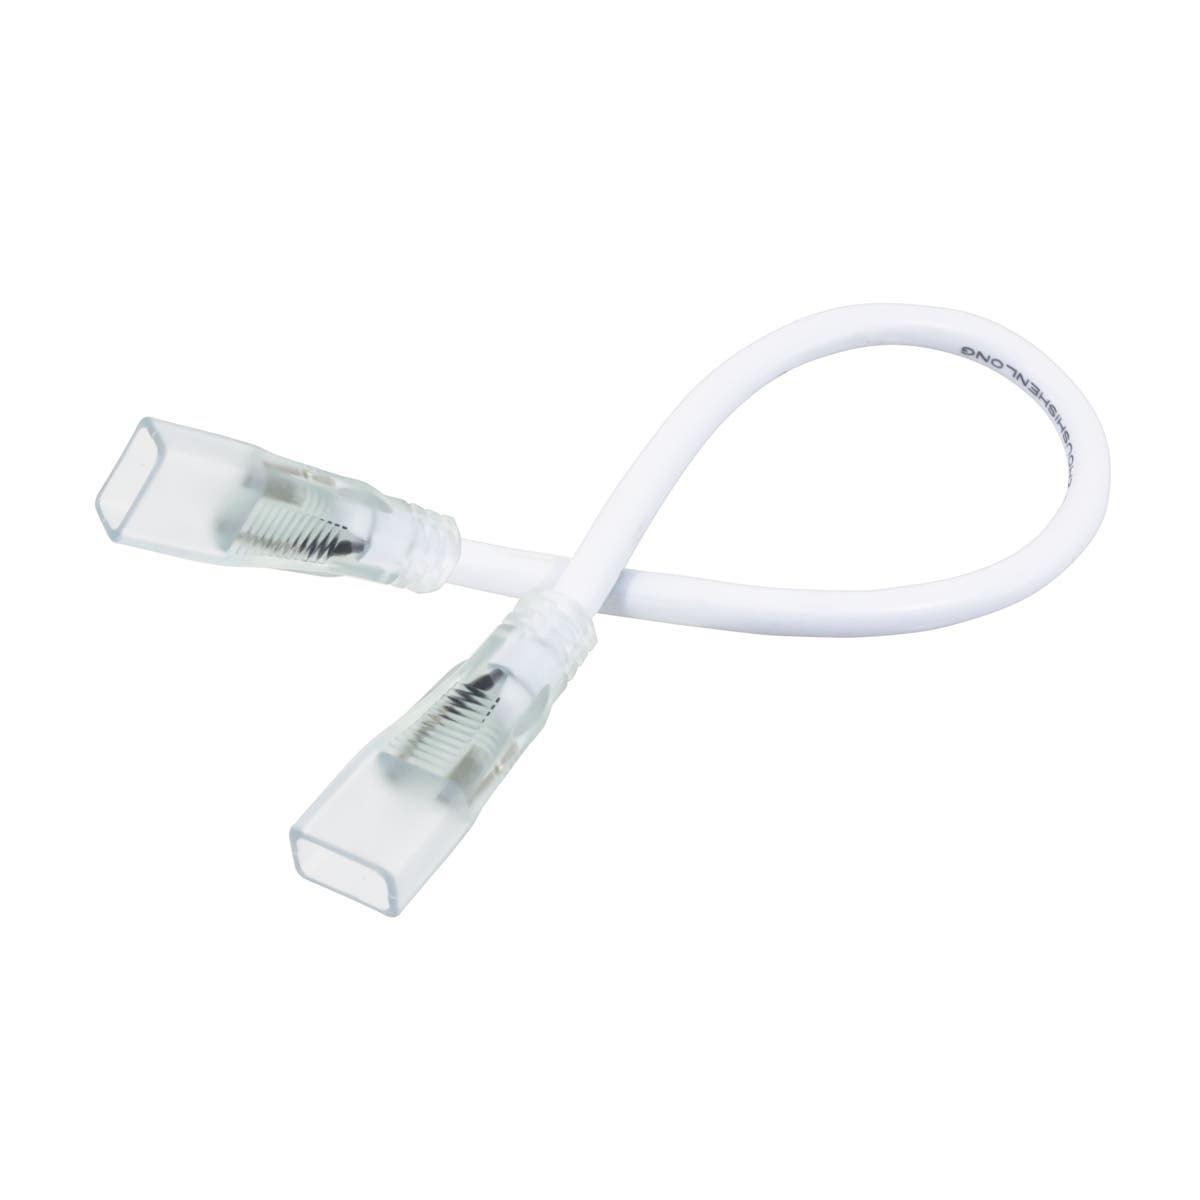 Hybrid 2 6in. Linking Cable - Bees Lighting